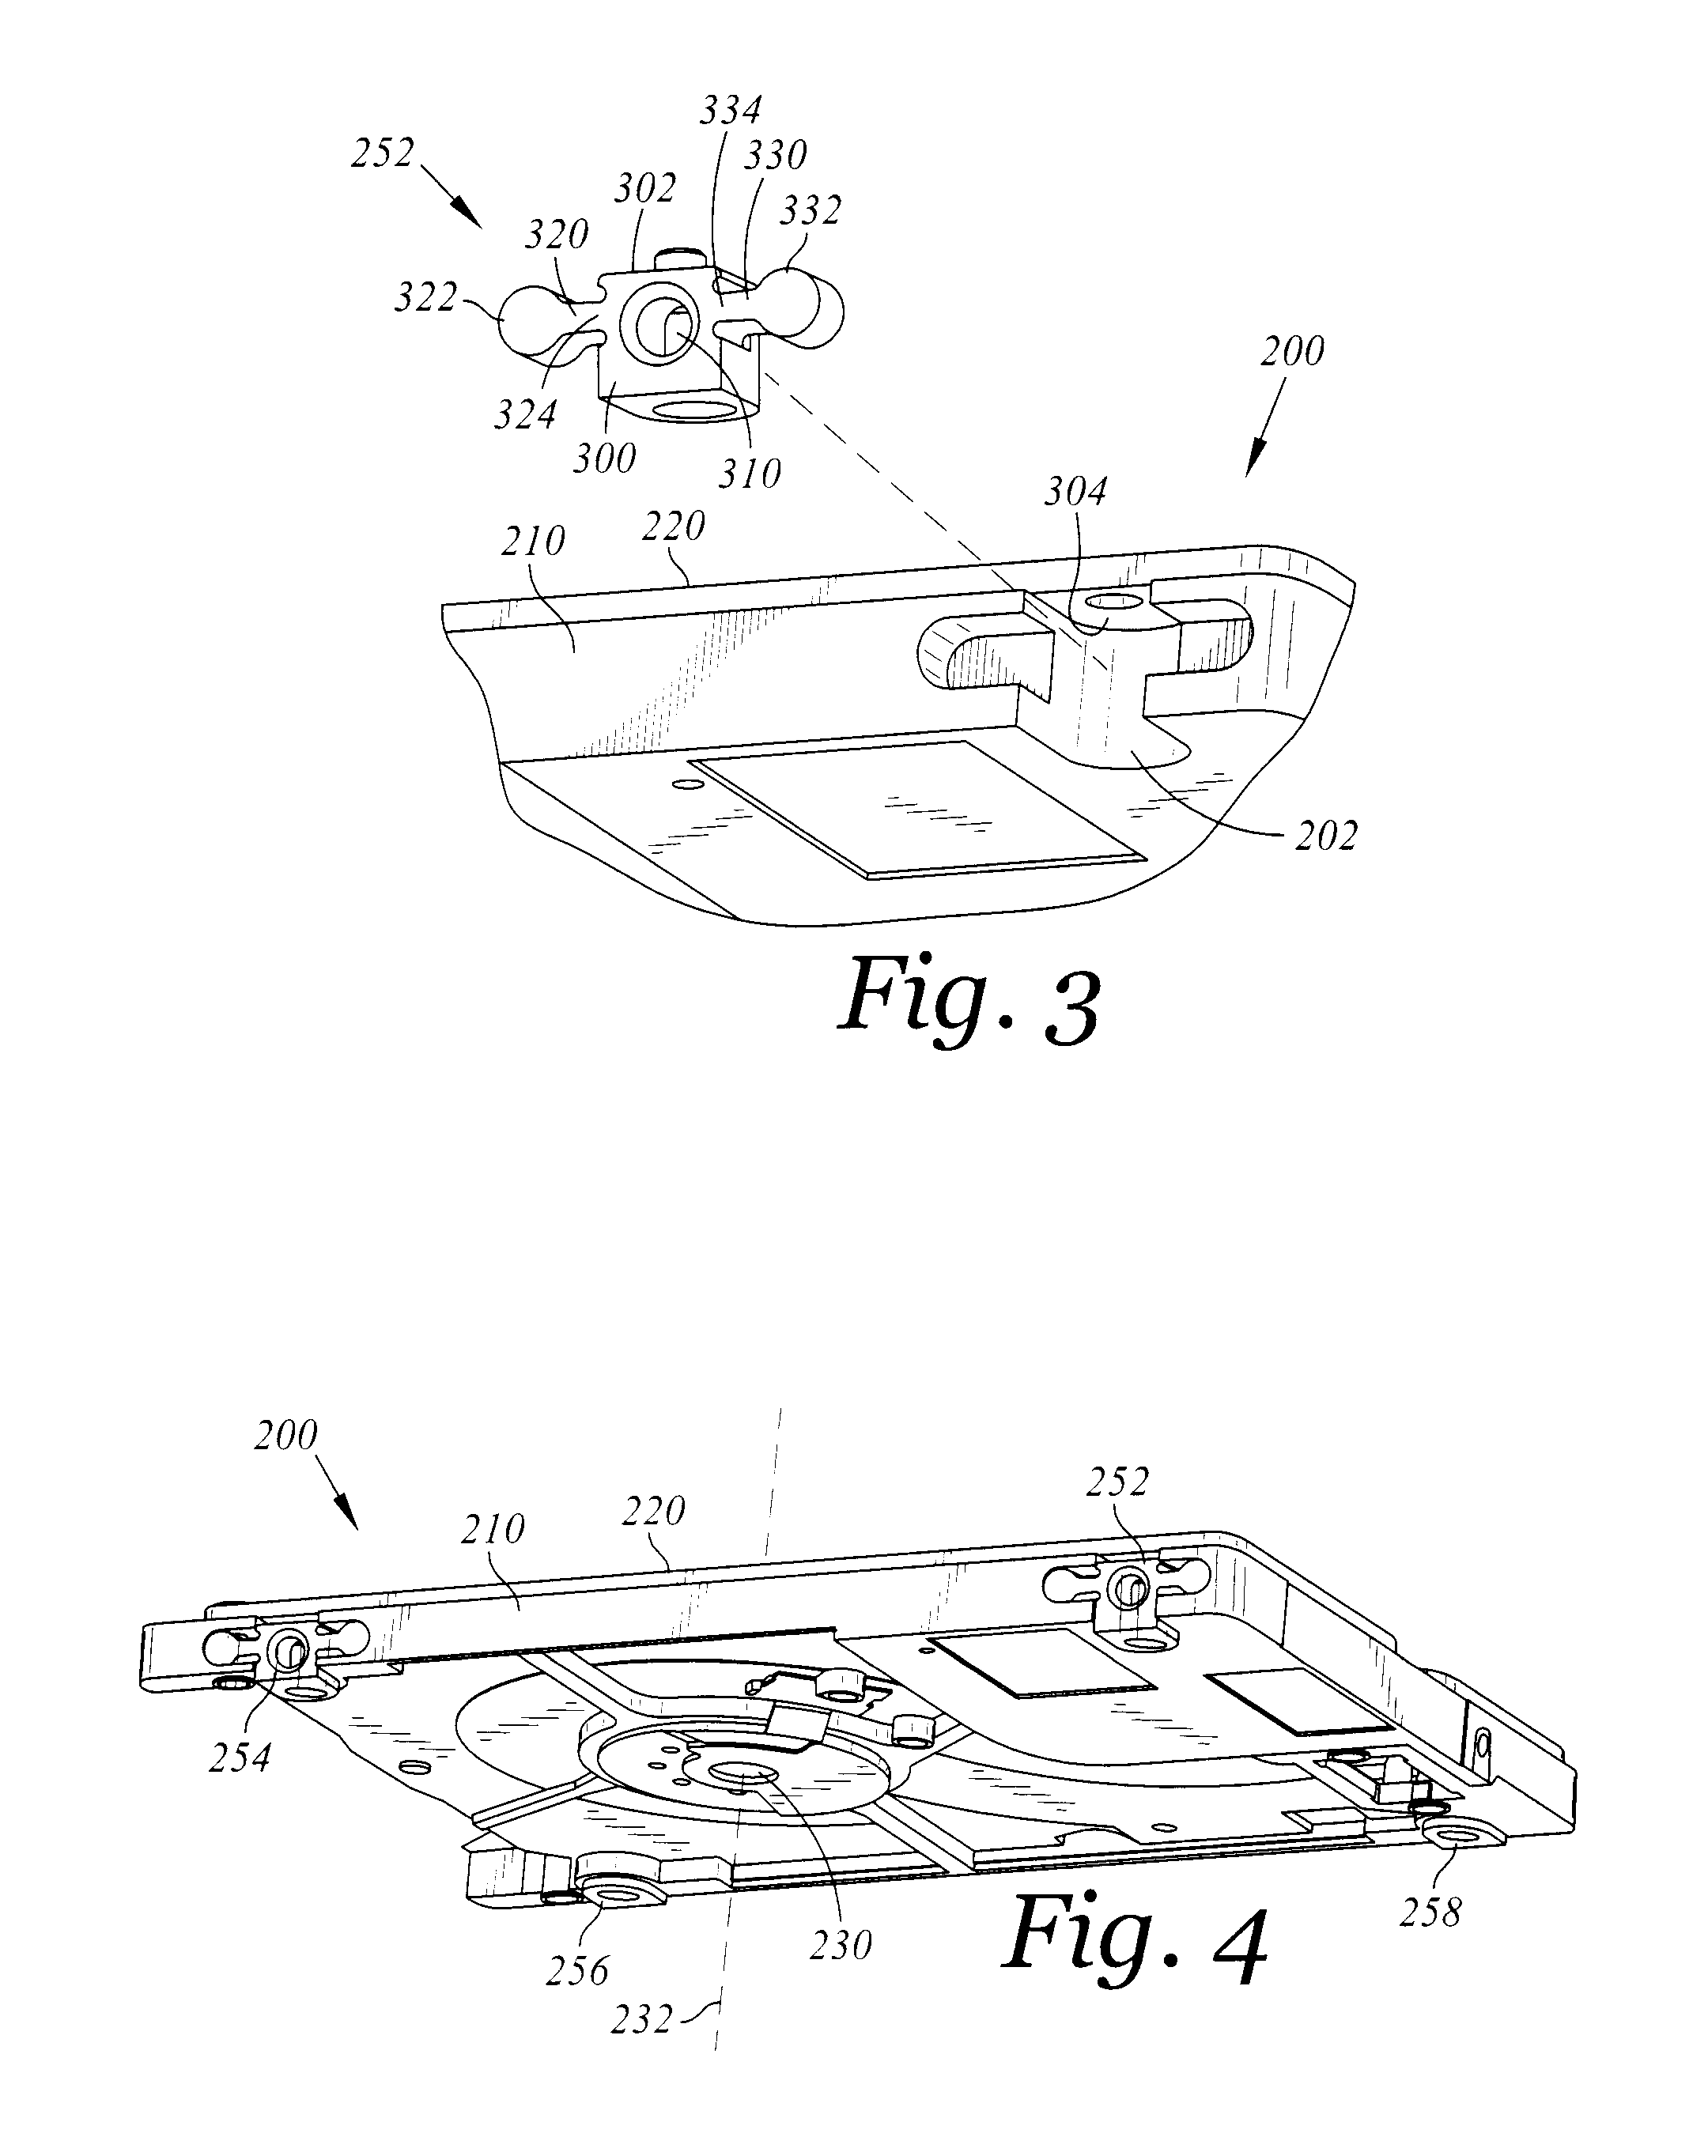 Disk drive having mounting inserts with cantilevered beams